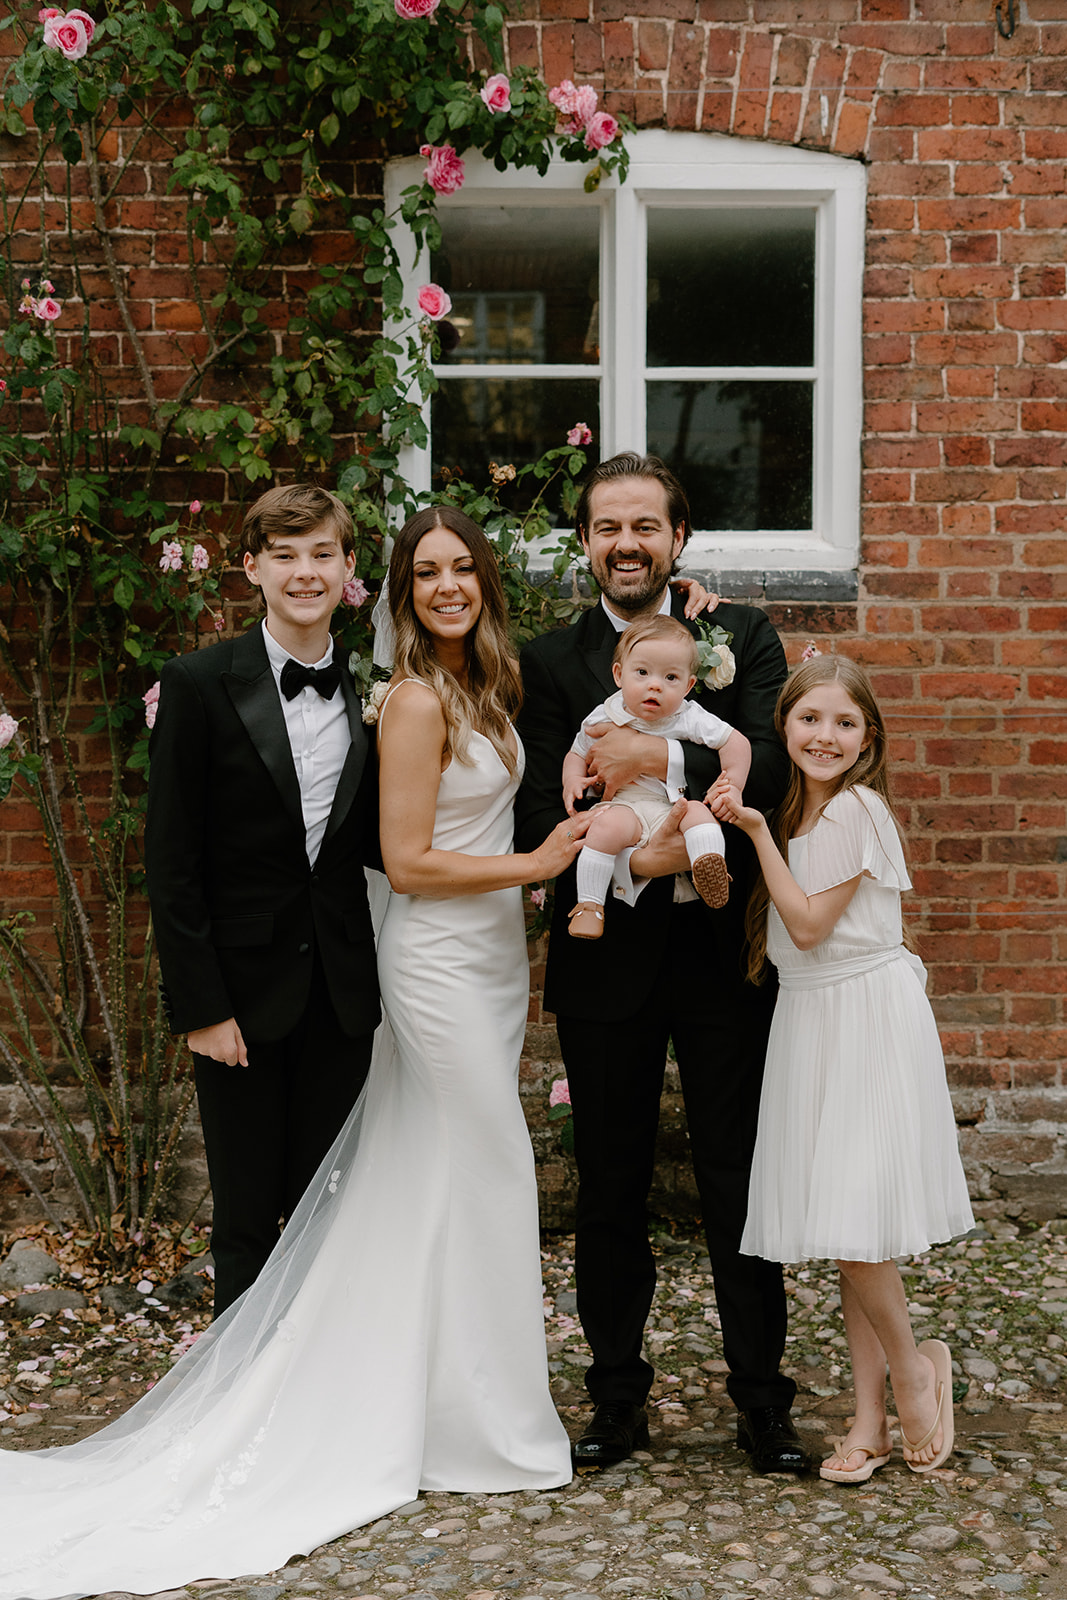 A quintessentially English summer wedding at luxury wedding venue Iscoyd Park with a green, black and white colour scheme, black tie and two wedding dresses photographed by Rebecca Kerr Photography.